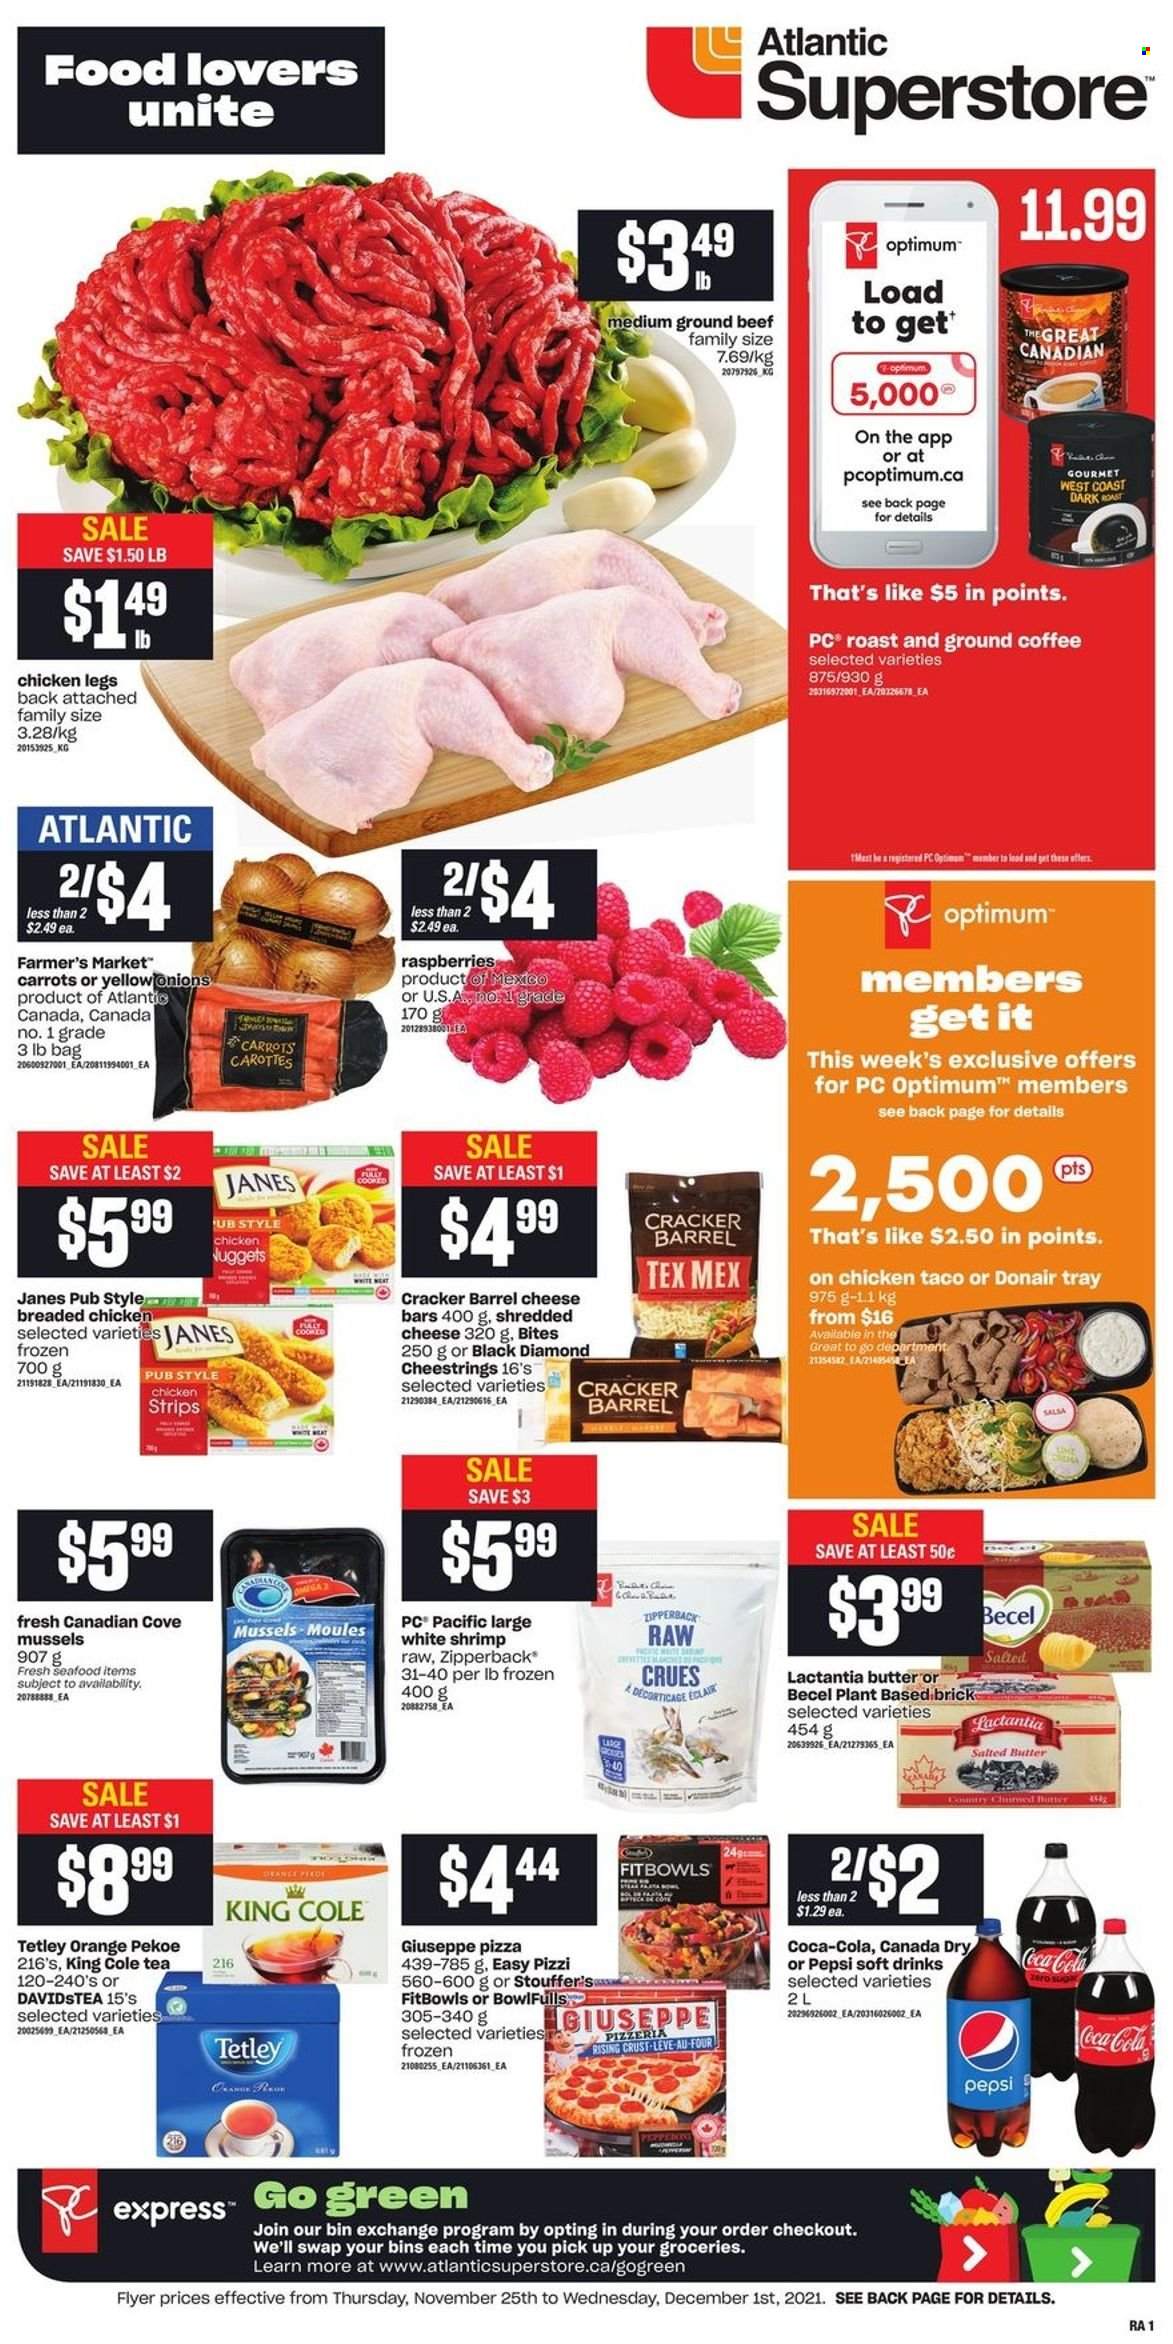 thumbnail - Atlantic Superstore Flyer - November 25, 2021 - December 01, 2021 - Sales products - carrots, mussels, seafood, shrimps, pizza, nuggets, fried chicken, shredded cheese, string cheese, butter, salted butter, strips, chicken strips, Stouffer's, crackers, oats, salsa, Canada Dry, Coca-Cola, Pepsi, soft drink, tea, coffee, ground coffee, chicken legs, chicken, beef meat, ground beef, Optimum, oranges. Page 1.